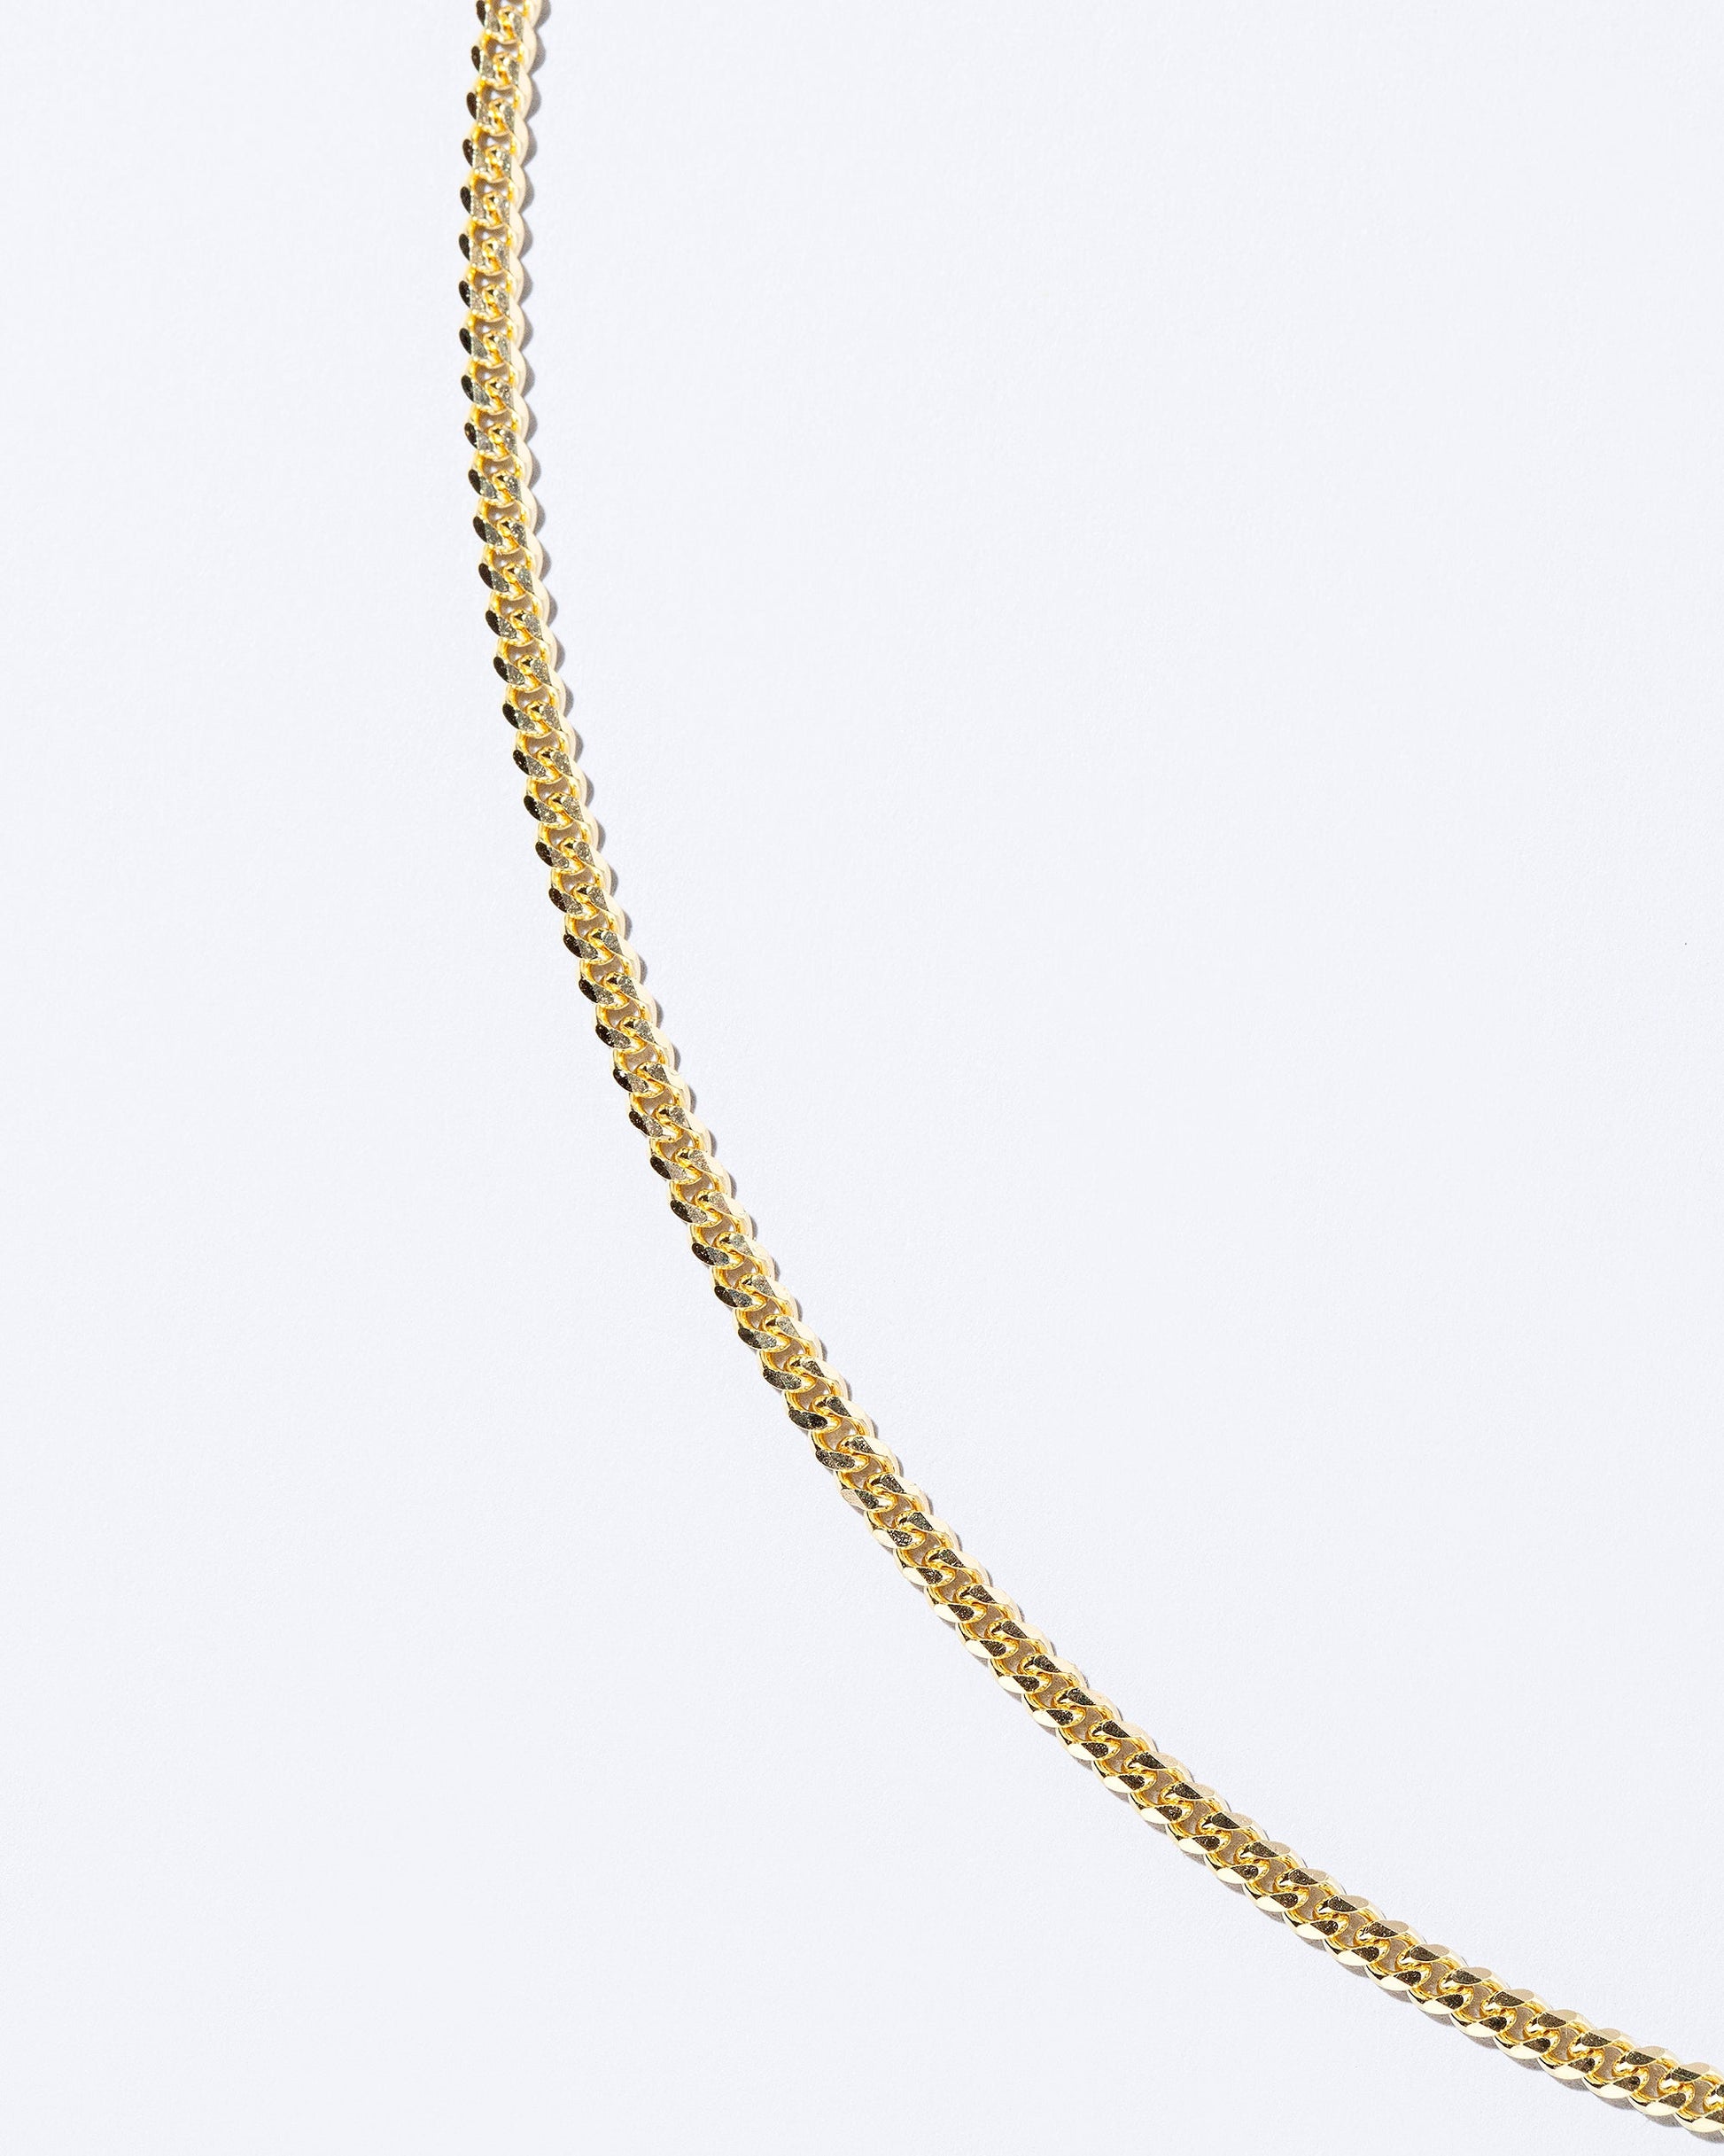  Curb Chain Necklace on light color background.